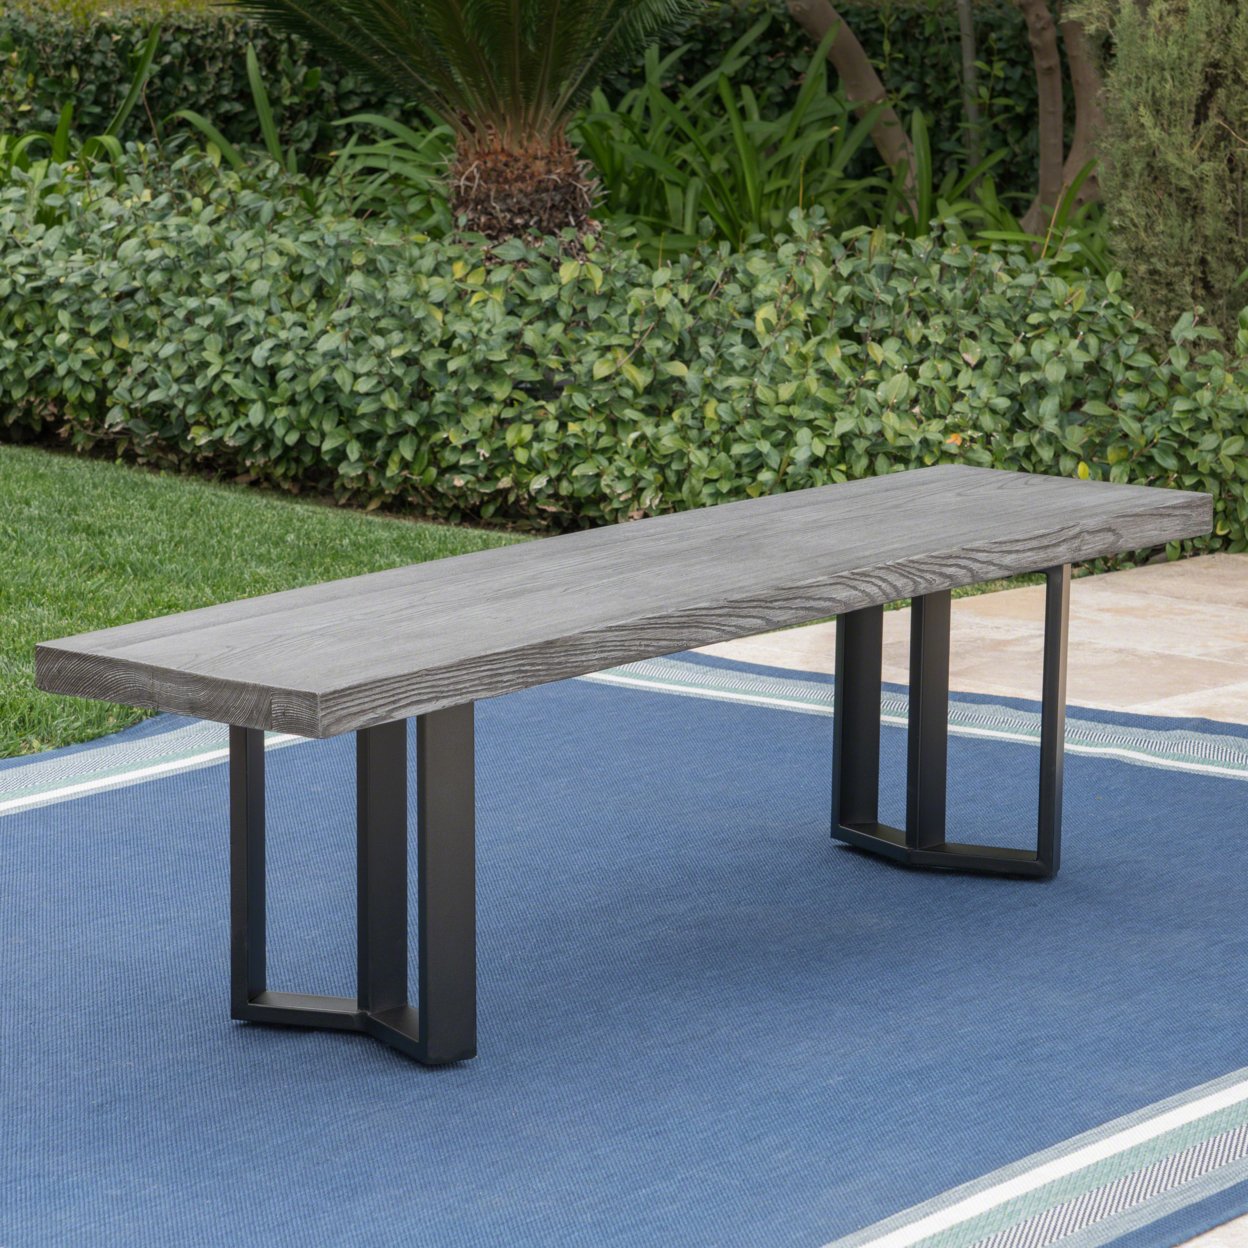 Santa Rosa Outdoor Finish Light Weight Concrete Dining Bench - Textured Gray